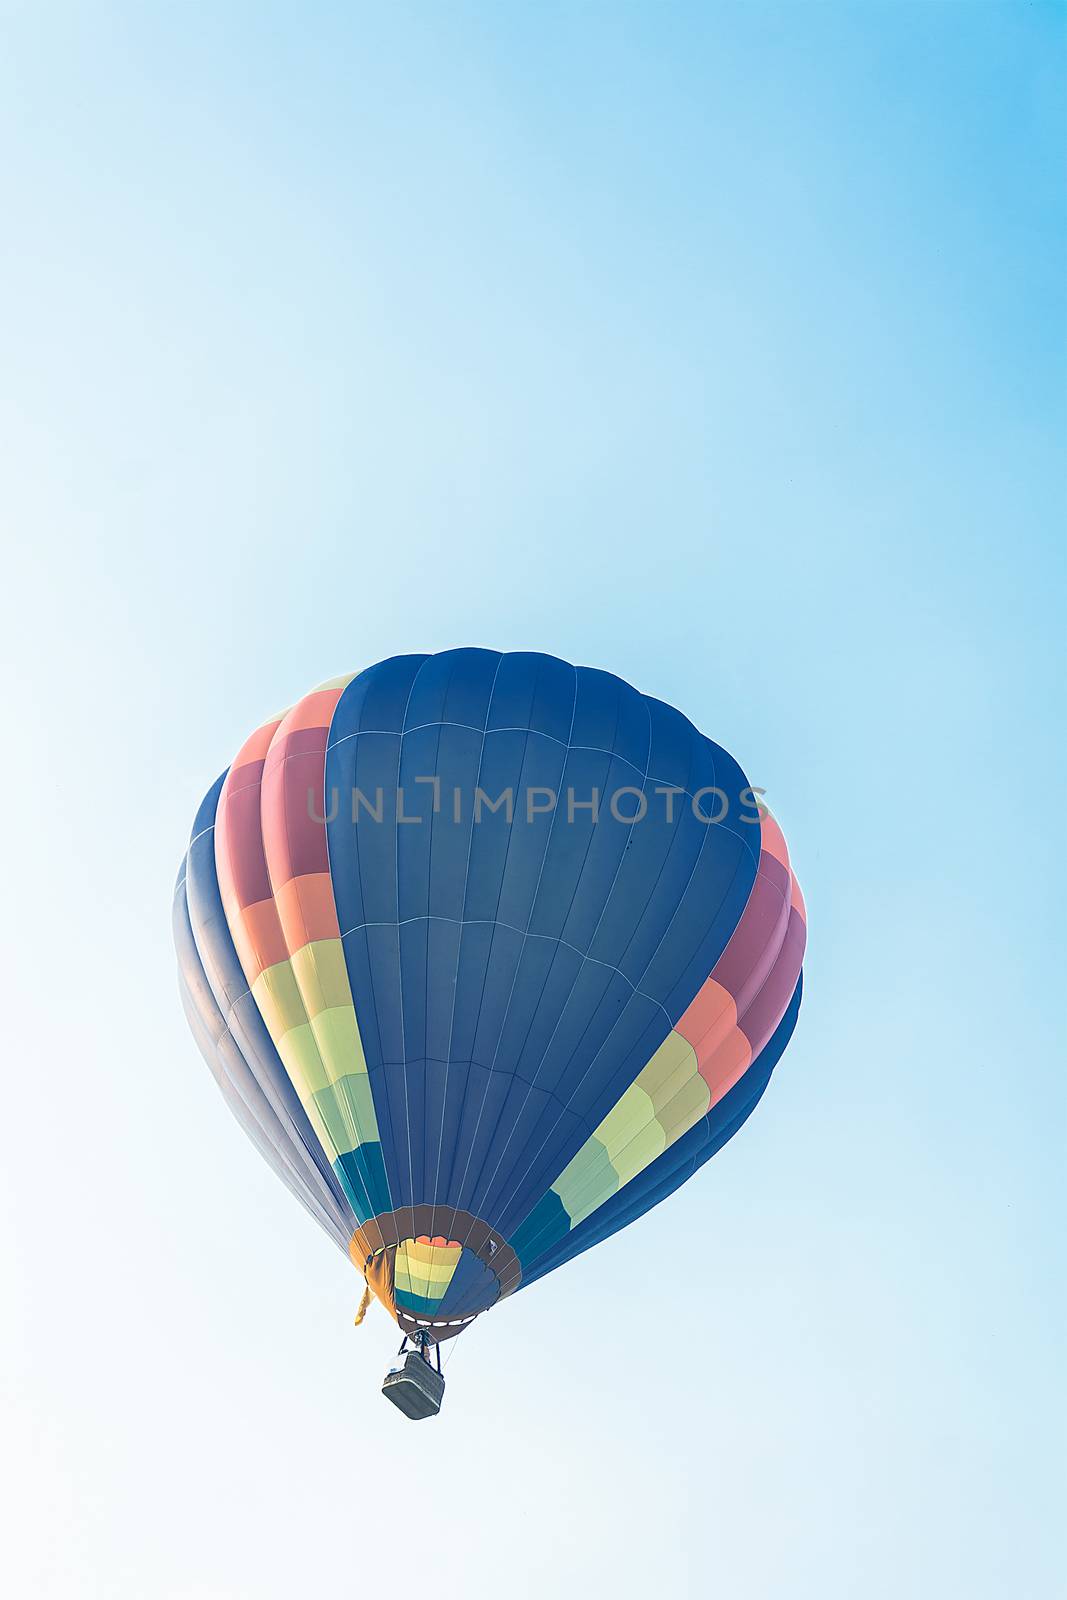 Hot balloon flying in the blue sky